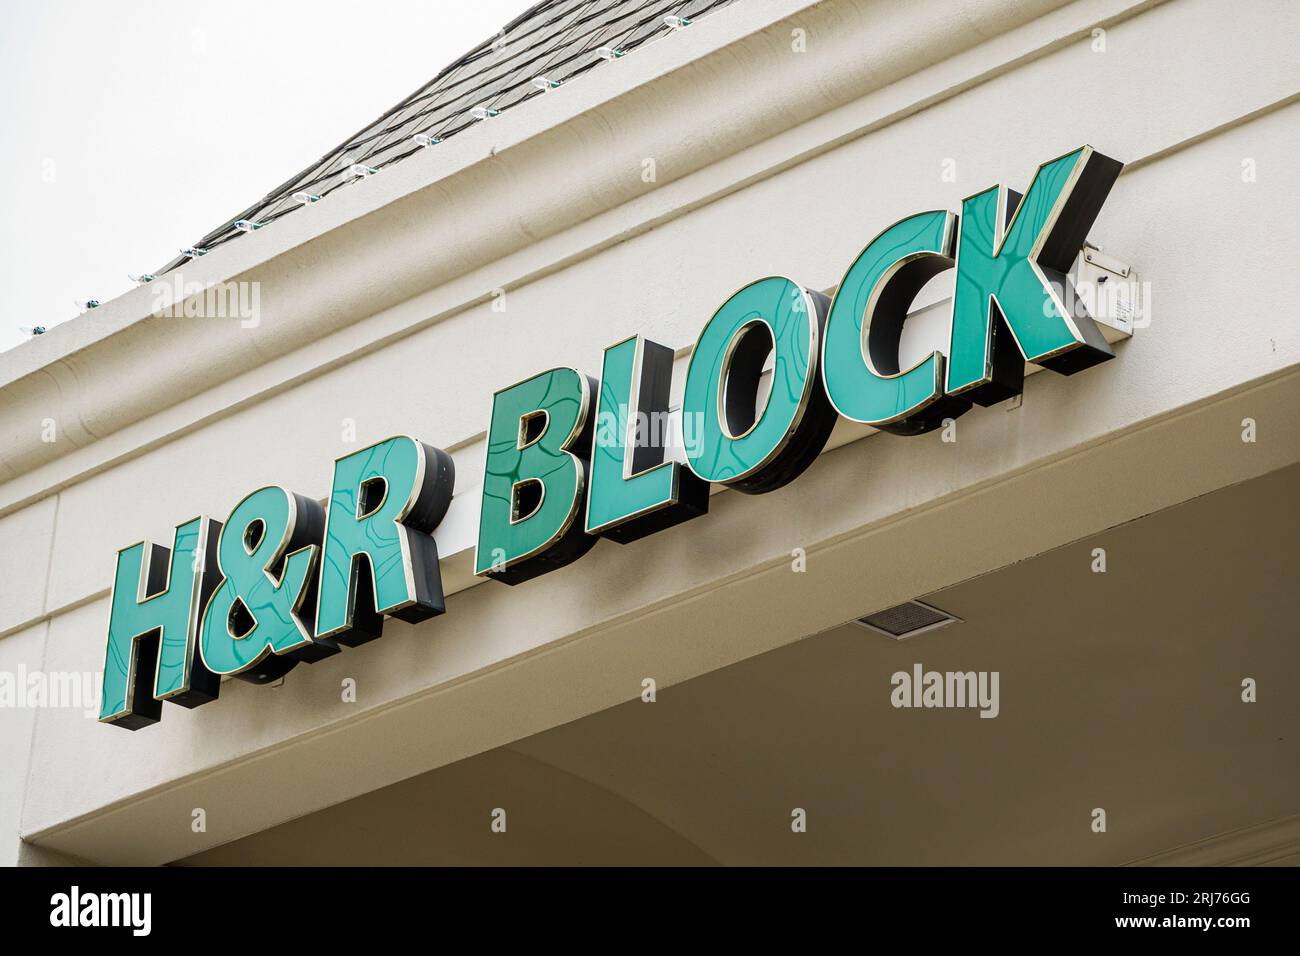 Charlotte North Carolina,H&R H & R Block tax services sign,outside exterior,building front entrance,business shop merchant market marketplace,selling Stock Photo